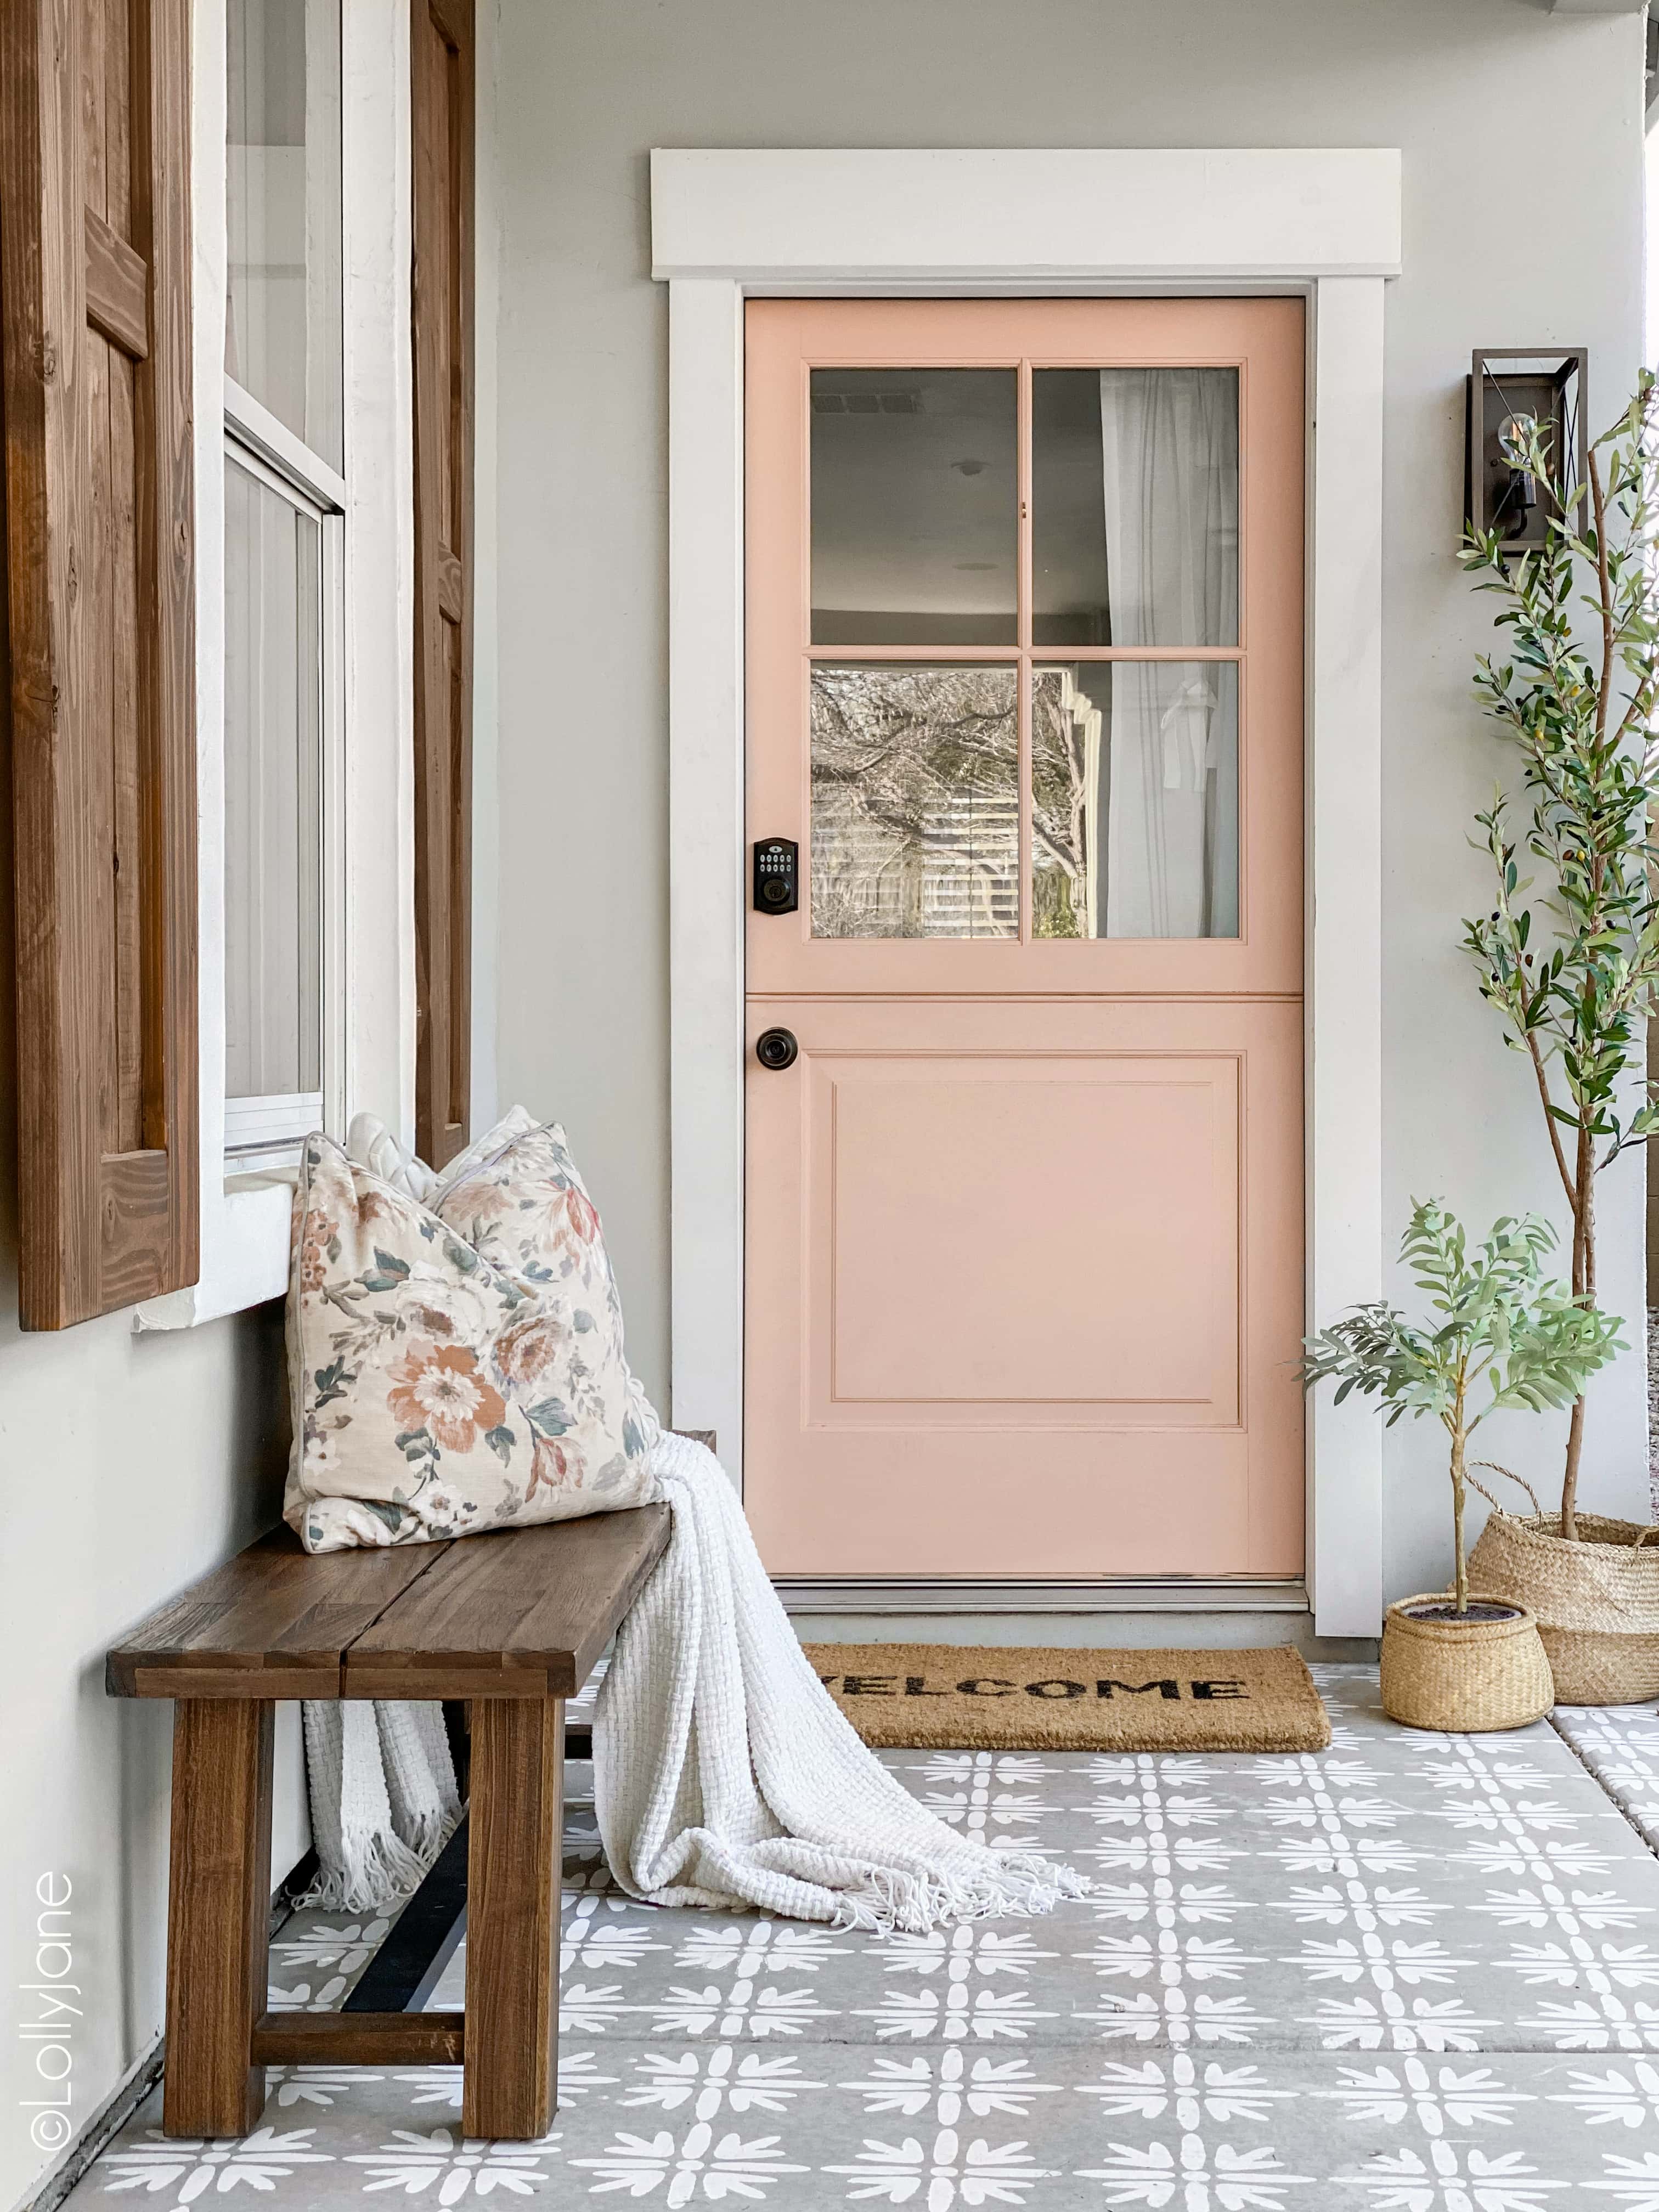 GORGEOUS Front Porch Makeover, check out the before-- WOW! Classic craftsman style home with a pop of pink, so good! #diy #stencil #Dutchdoor #pinkdoor #makeover #porchdecor #porchmakeover